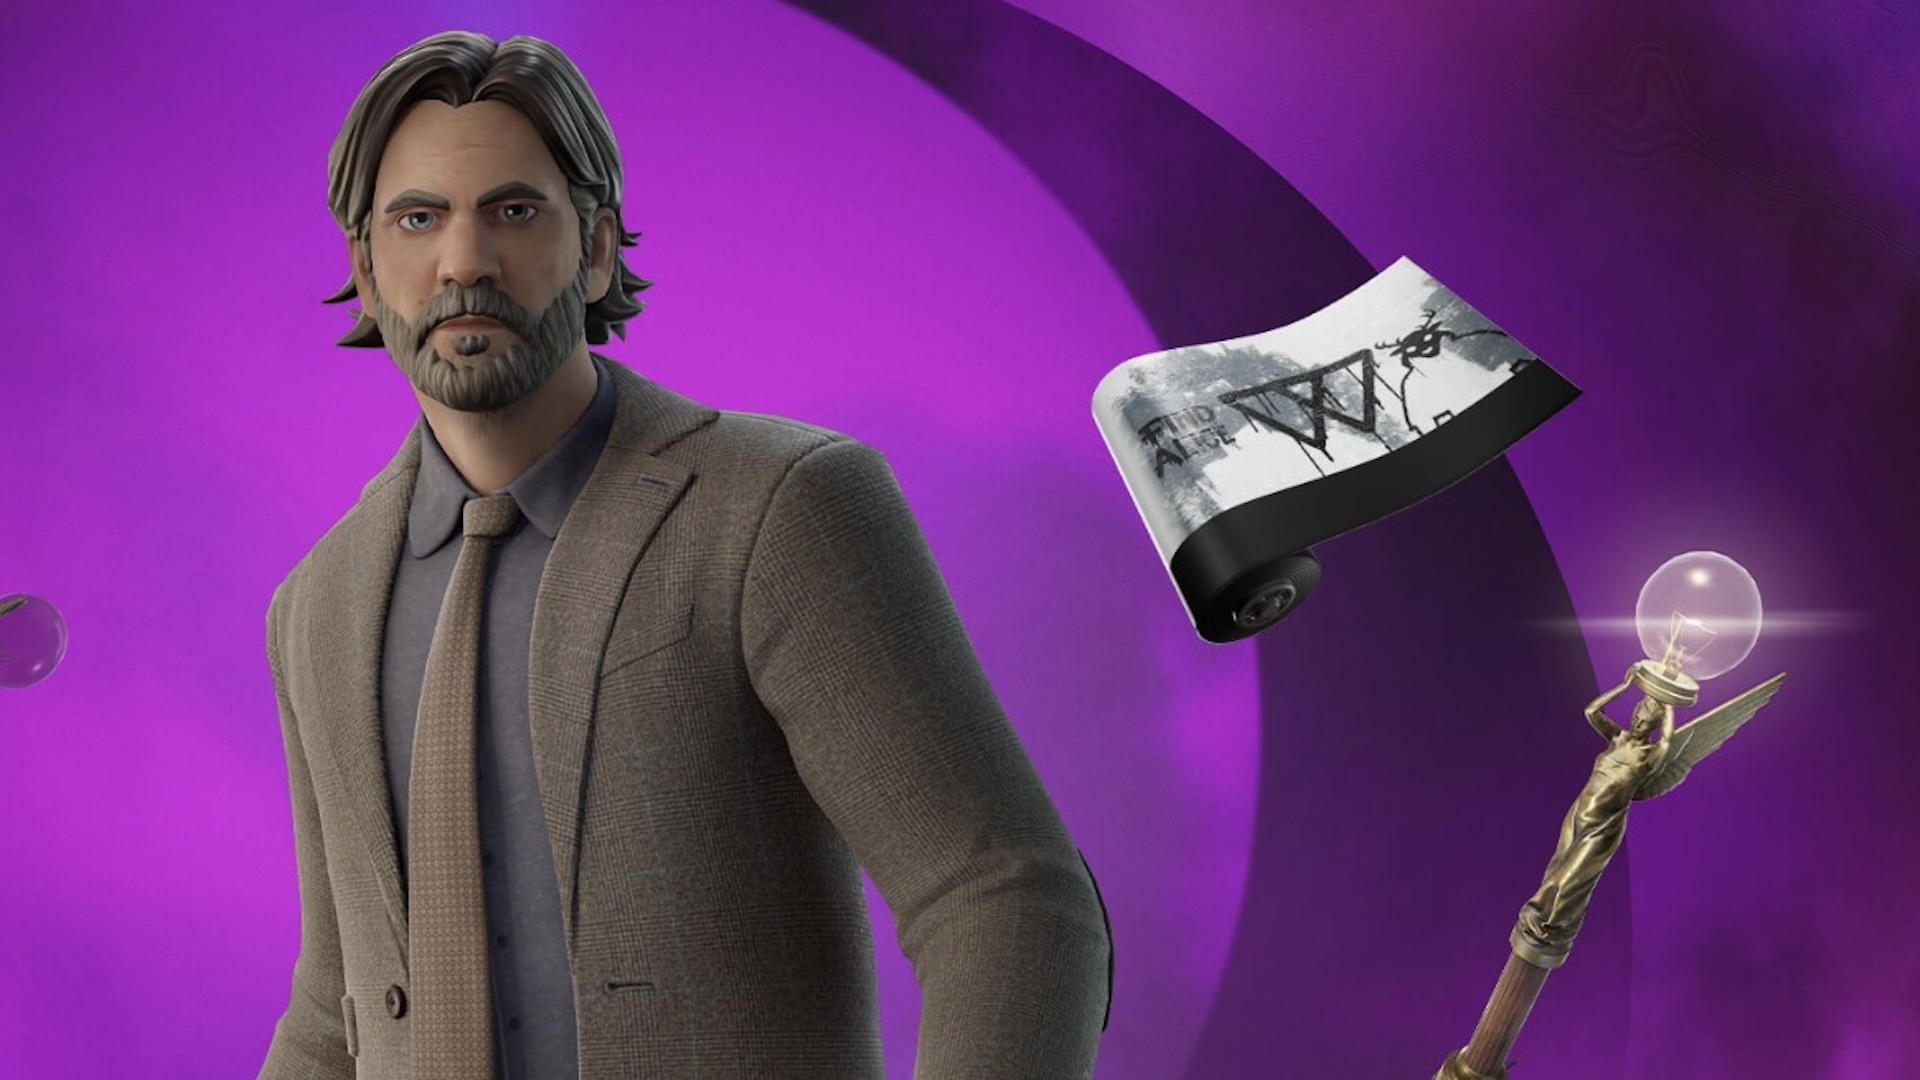 Video game character Alan Wake as a Fortnite character, on a purple background